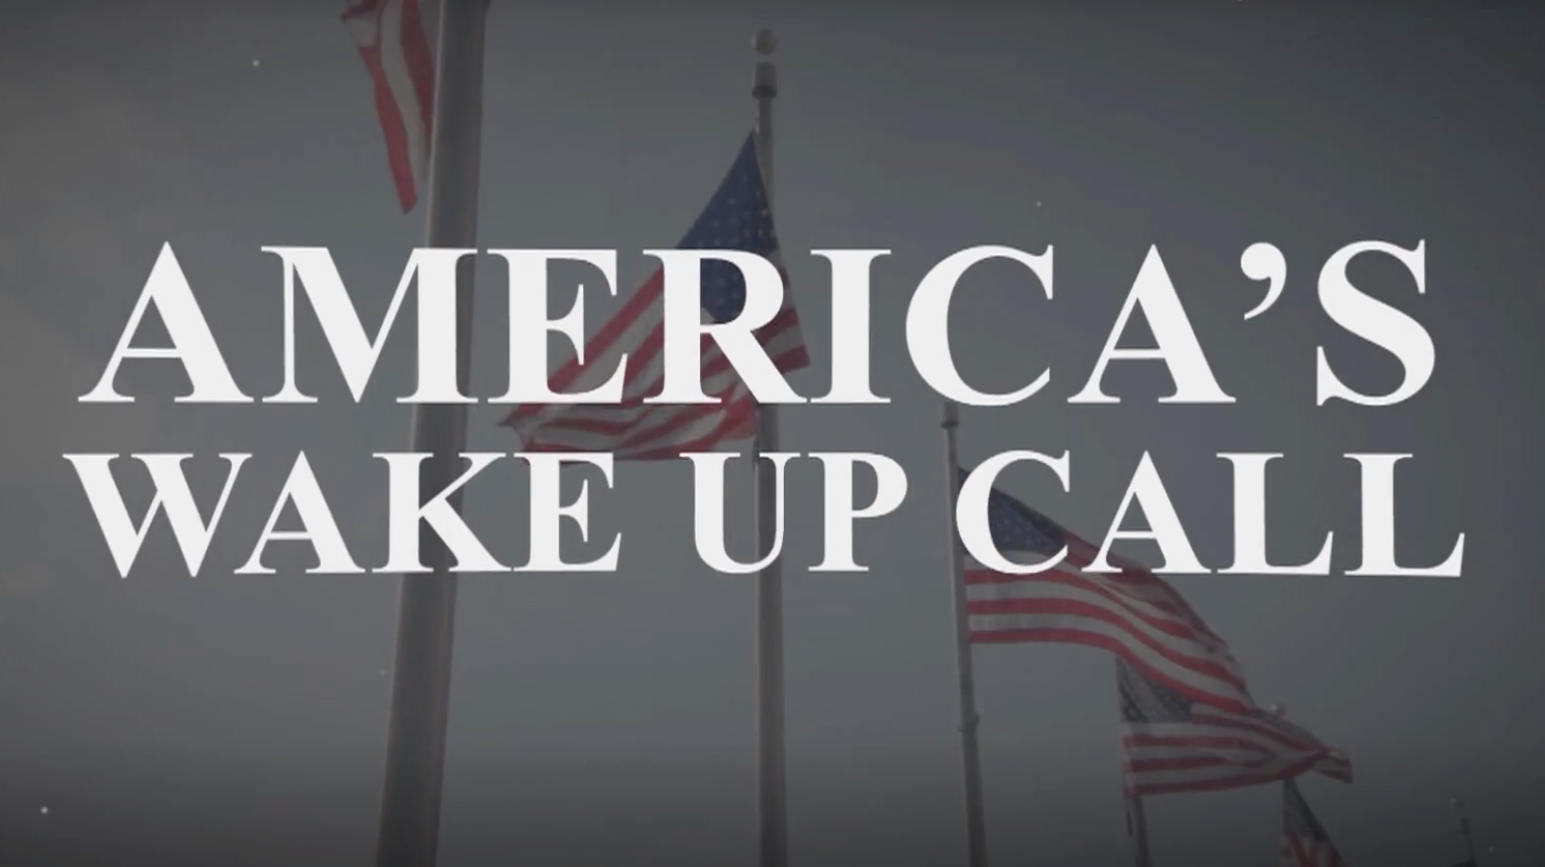 America’s Wake Up Call: Congress Has Problems